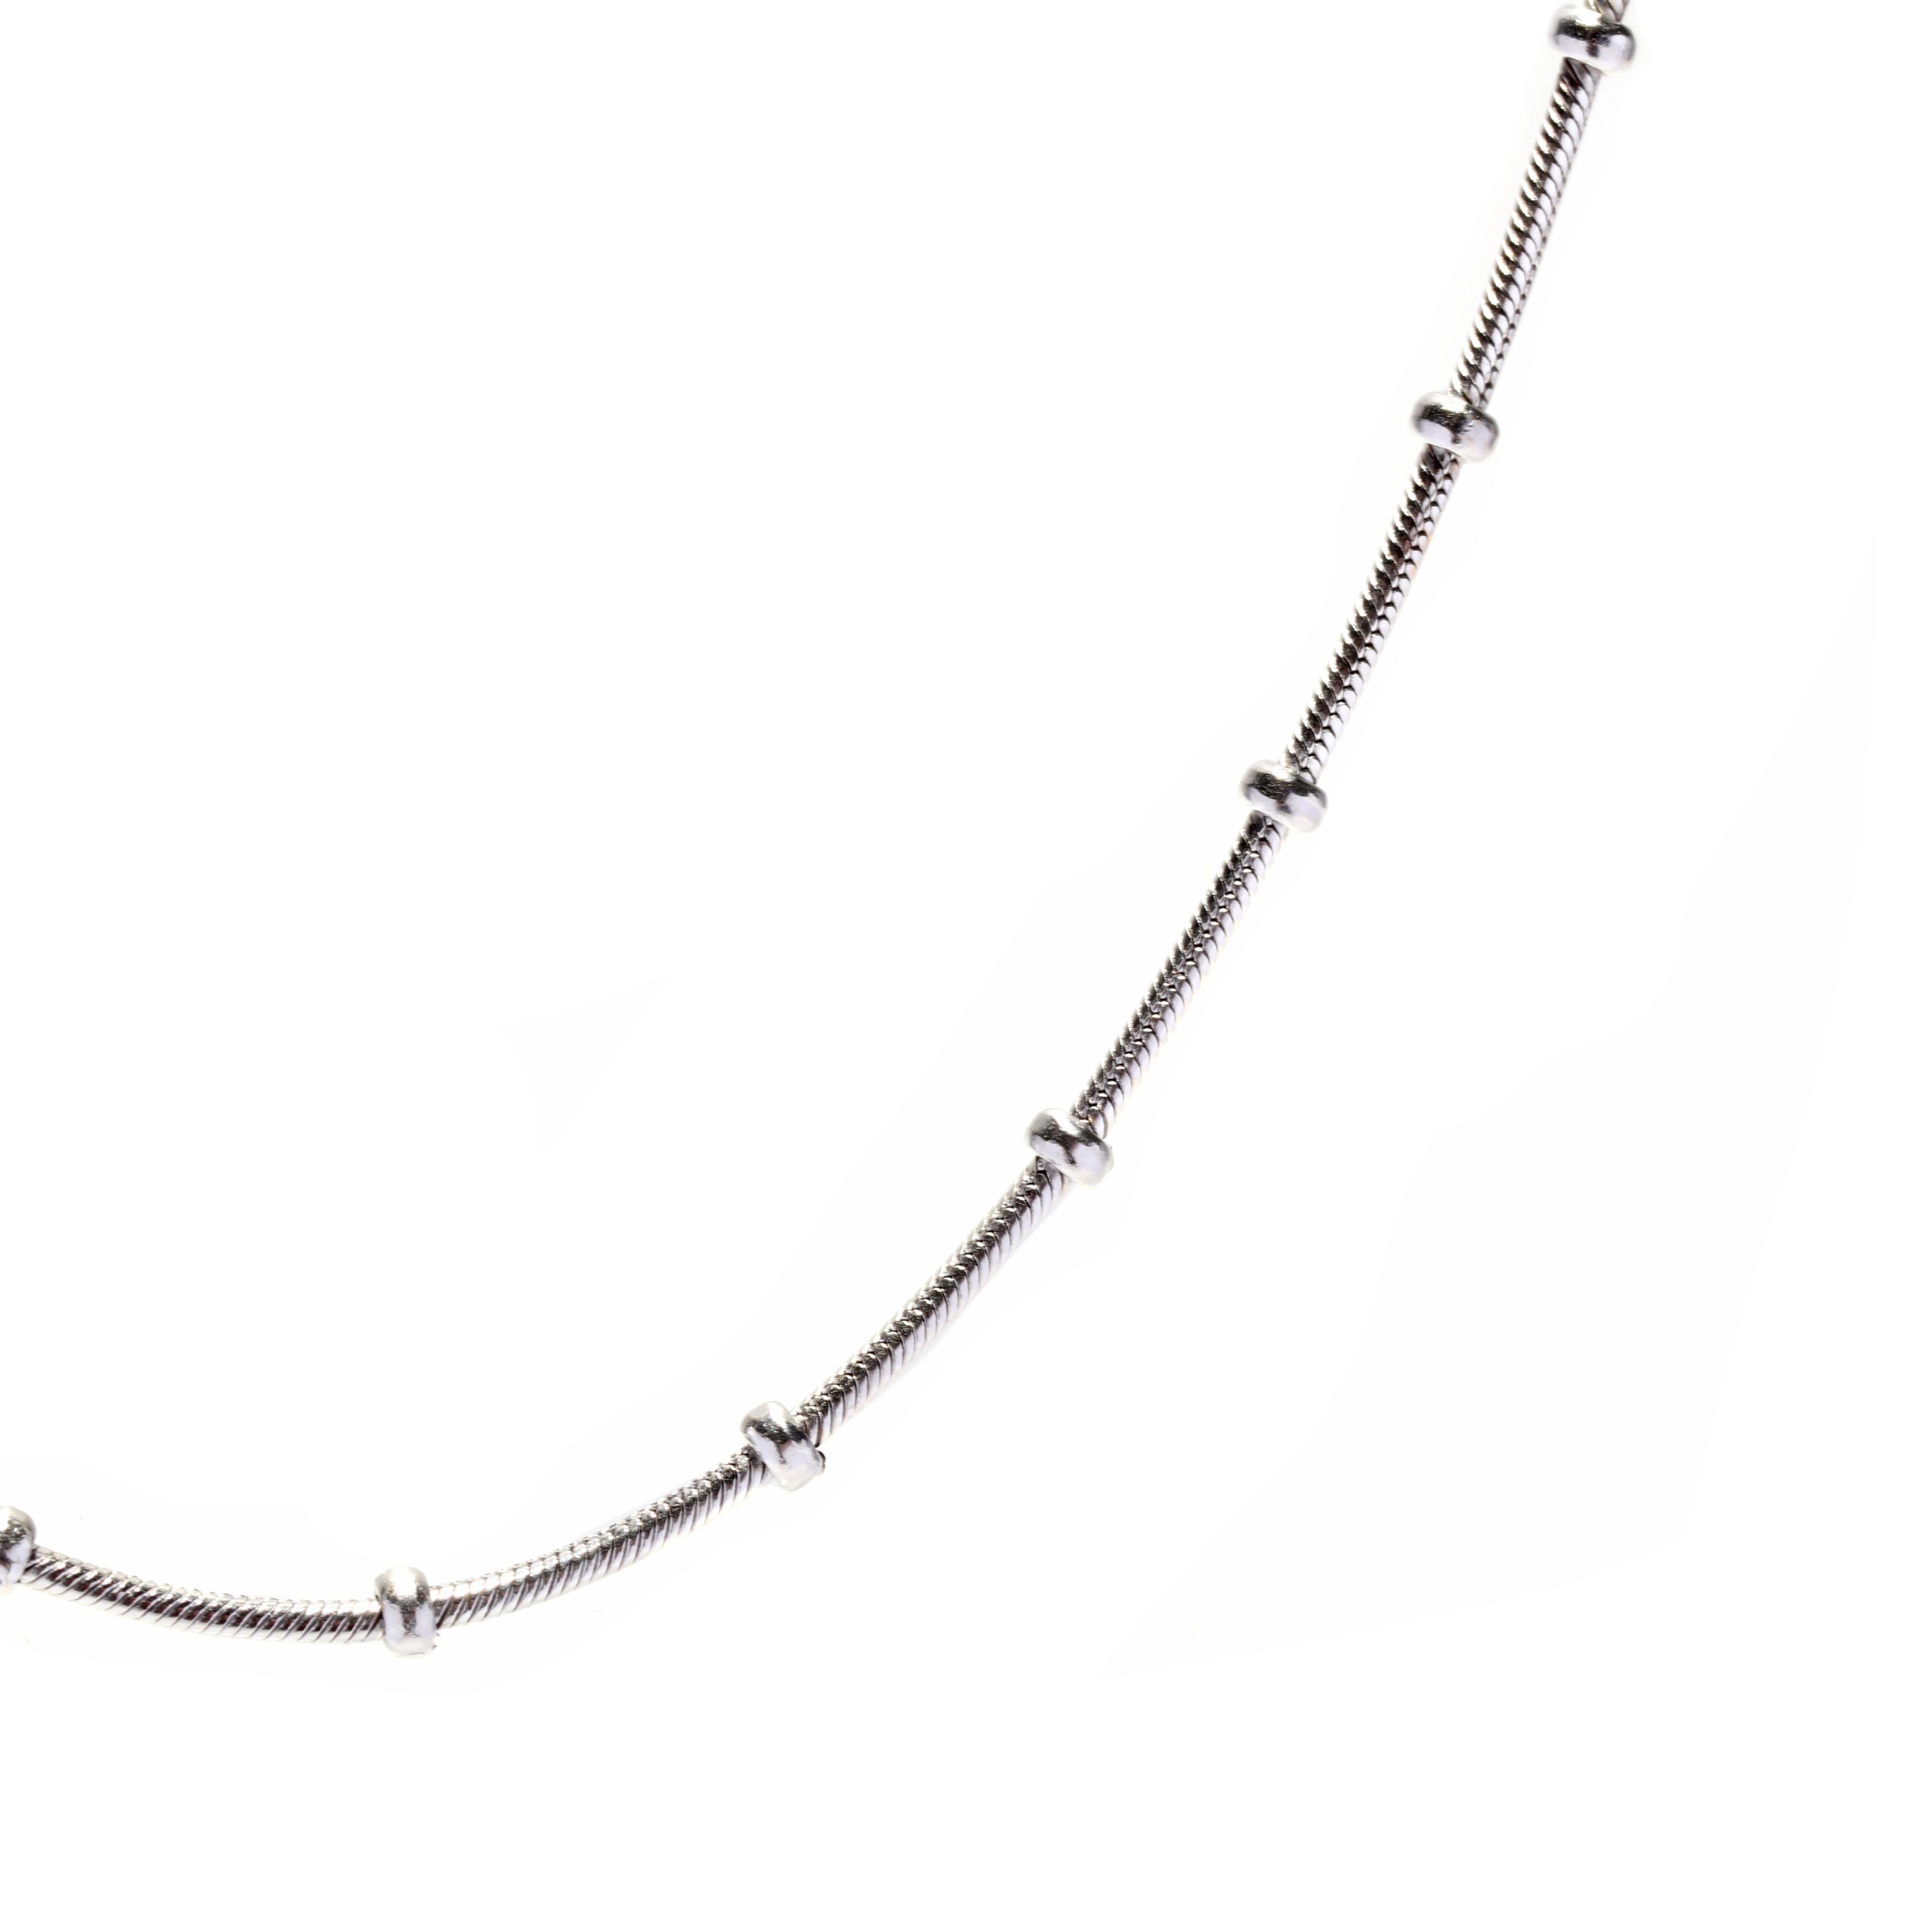 A vintage 18 karat white gold bead snake chain. This chain features a snake link chain with white gold bead accents and a lobster clasp.

Length: 17.75 in.

Width: 2mm

Weight: 3.9 dwts. 



Ring Sizings & Modifications:
* We are happy to assist in